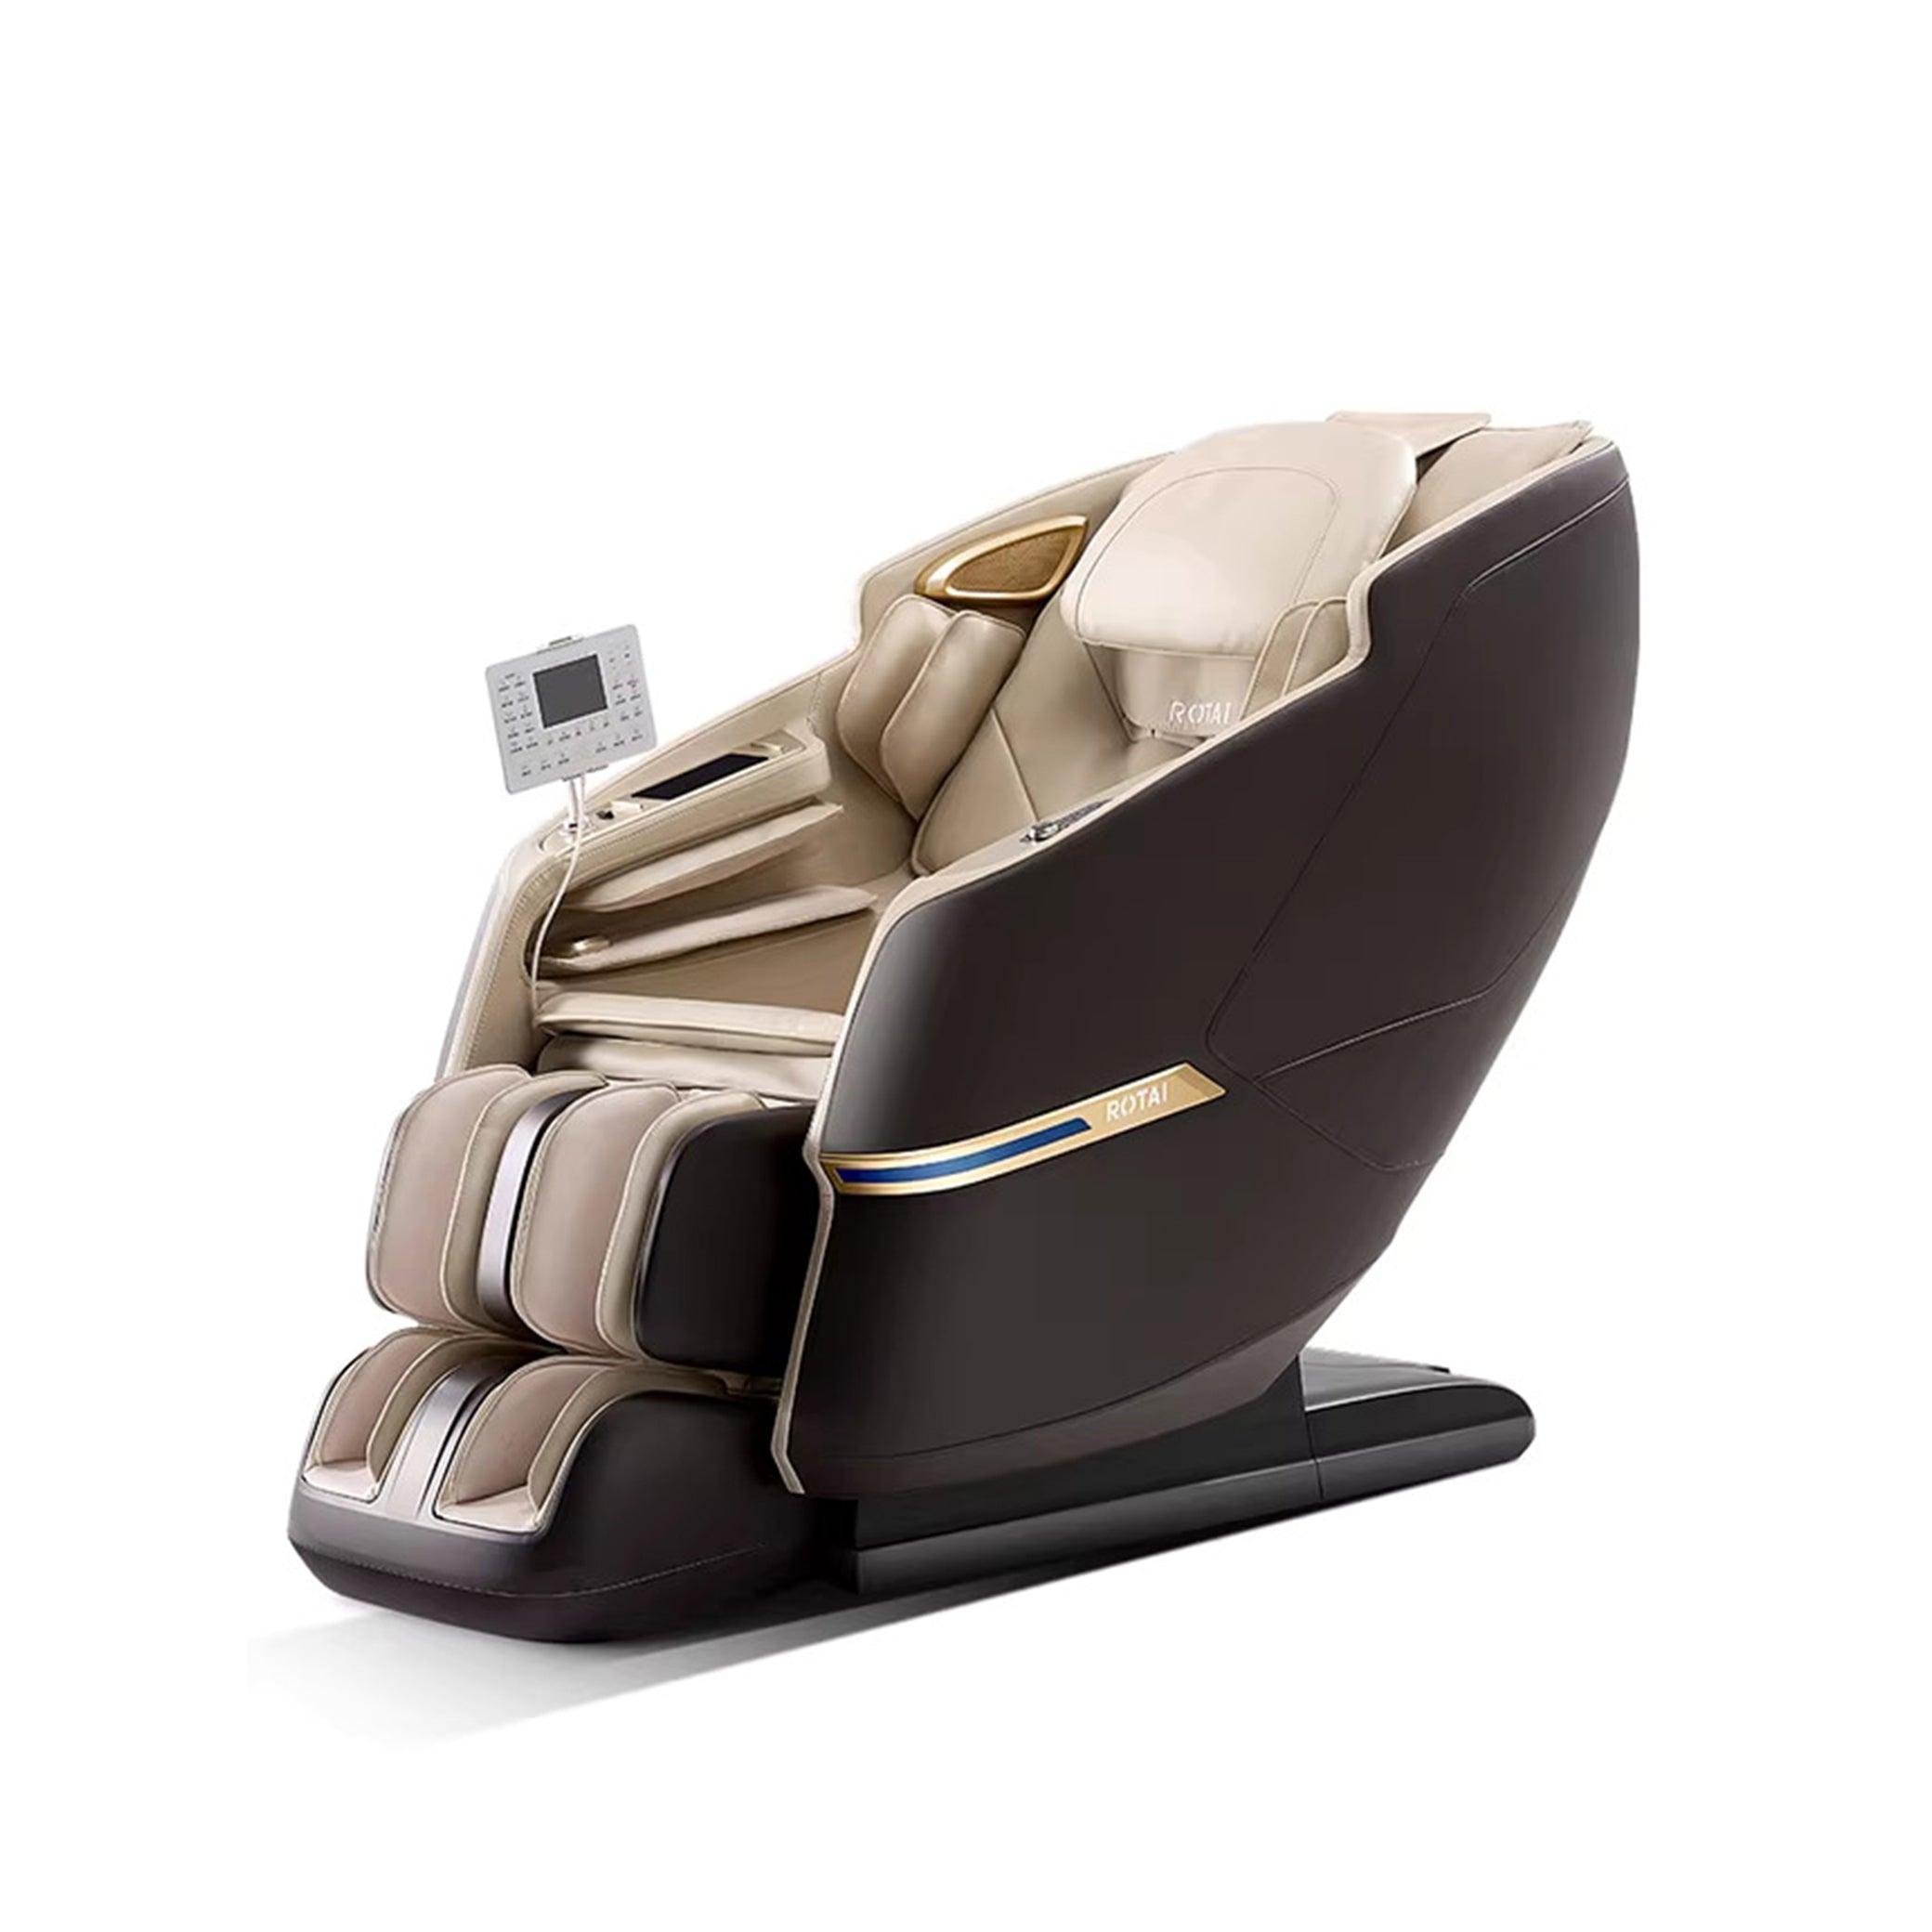 Royal Magestic Pro Massage Chair (Brown) with 3D Movement and AI Smart Massage technology - best massage chair in UAE and Dubai.